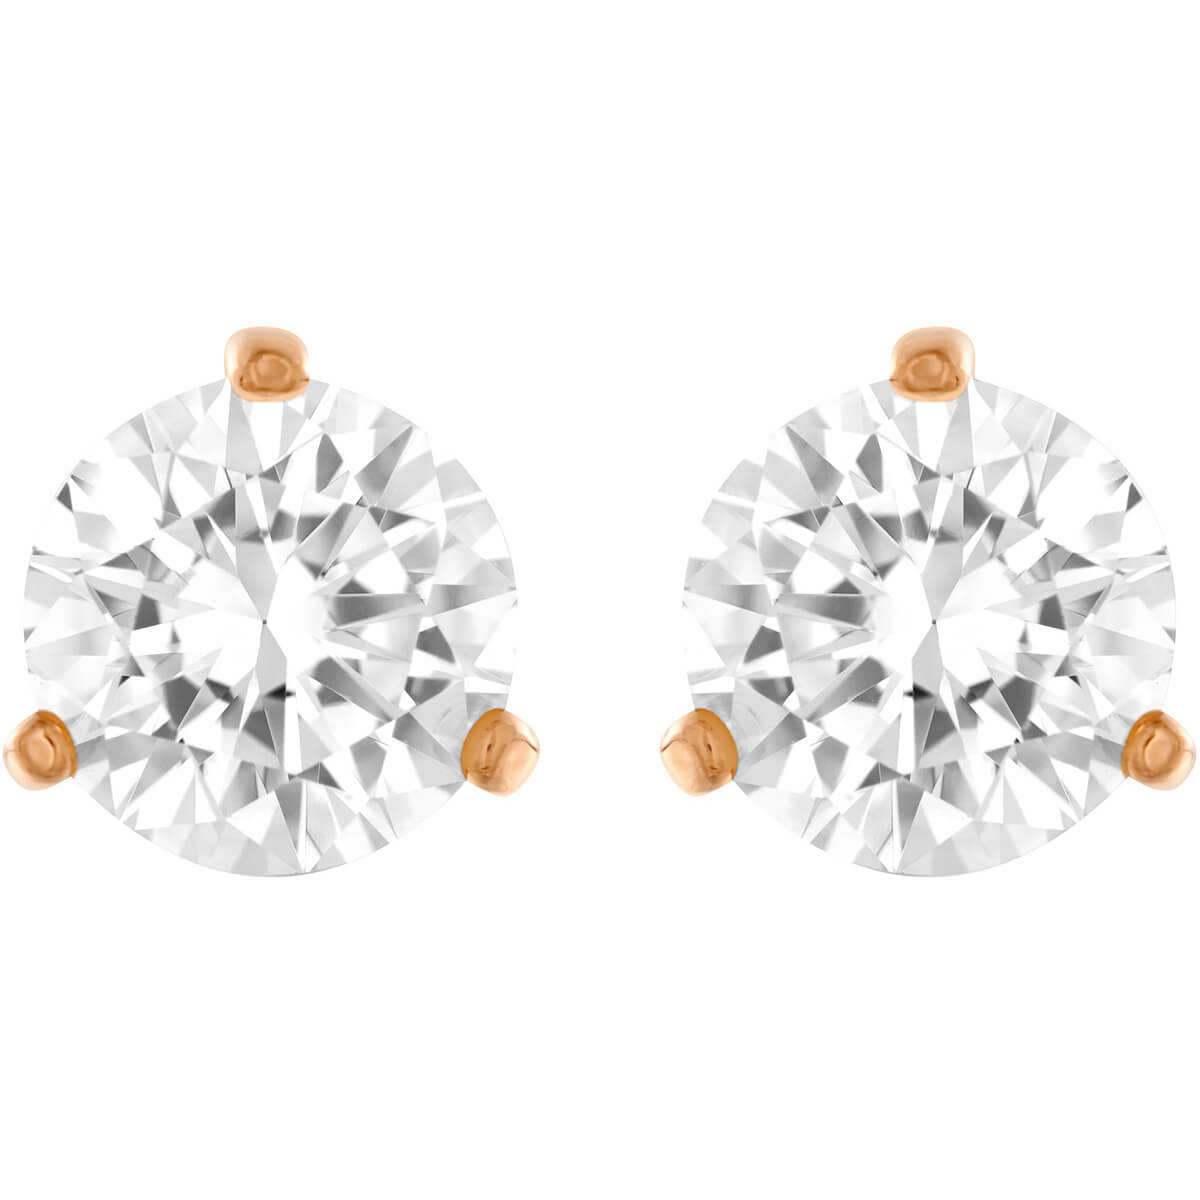 Photos - Wrist Watch Swarovski Solitaire Pierced Earrings - White with Rose Gold Plating 